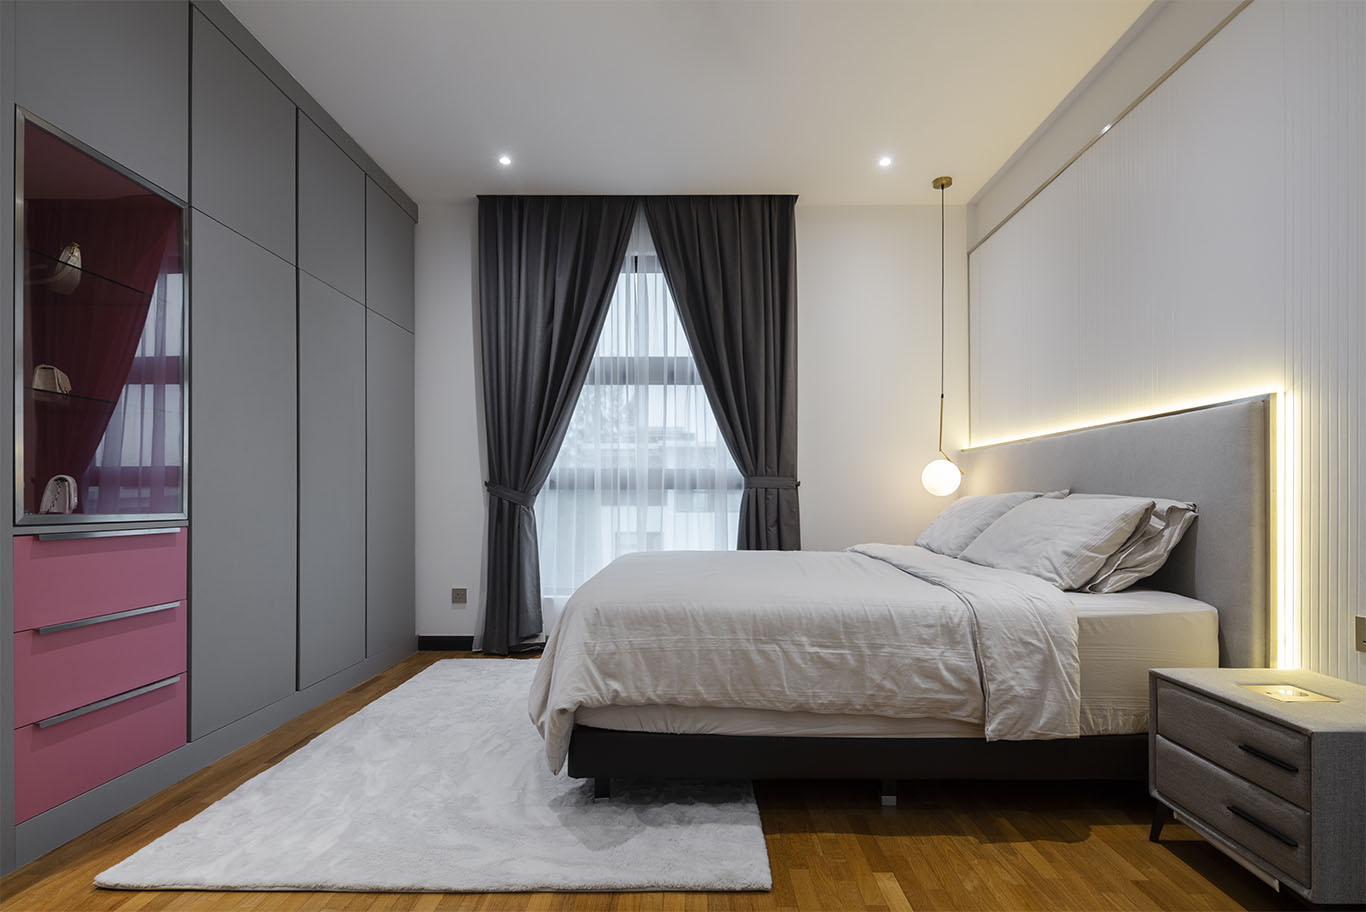 MIEUX La Famillie De Lee modern bedroom design with tall minimalist grey cupboard and grey curtain mieux interior design